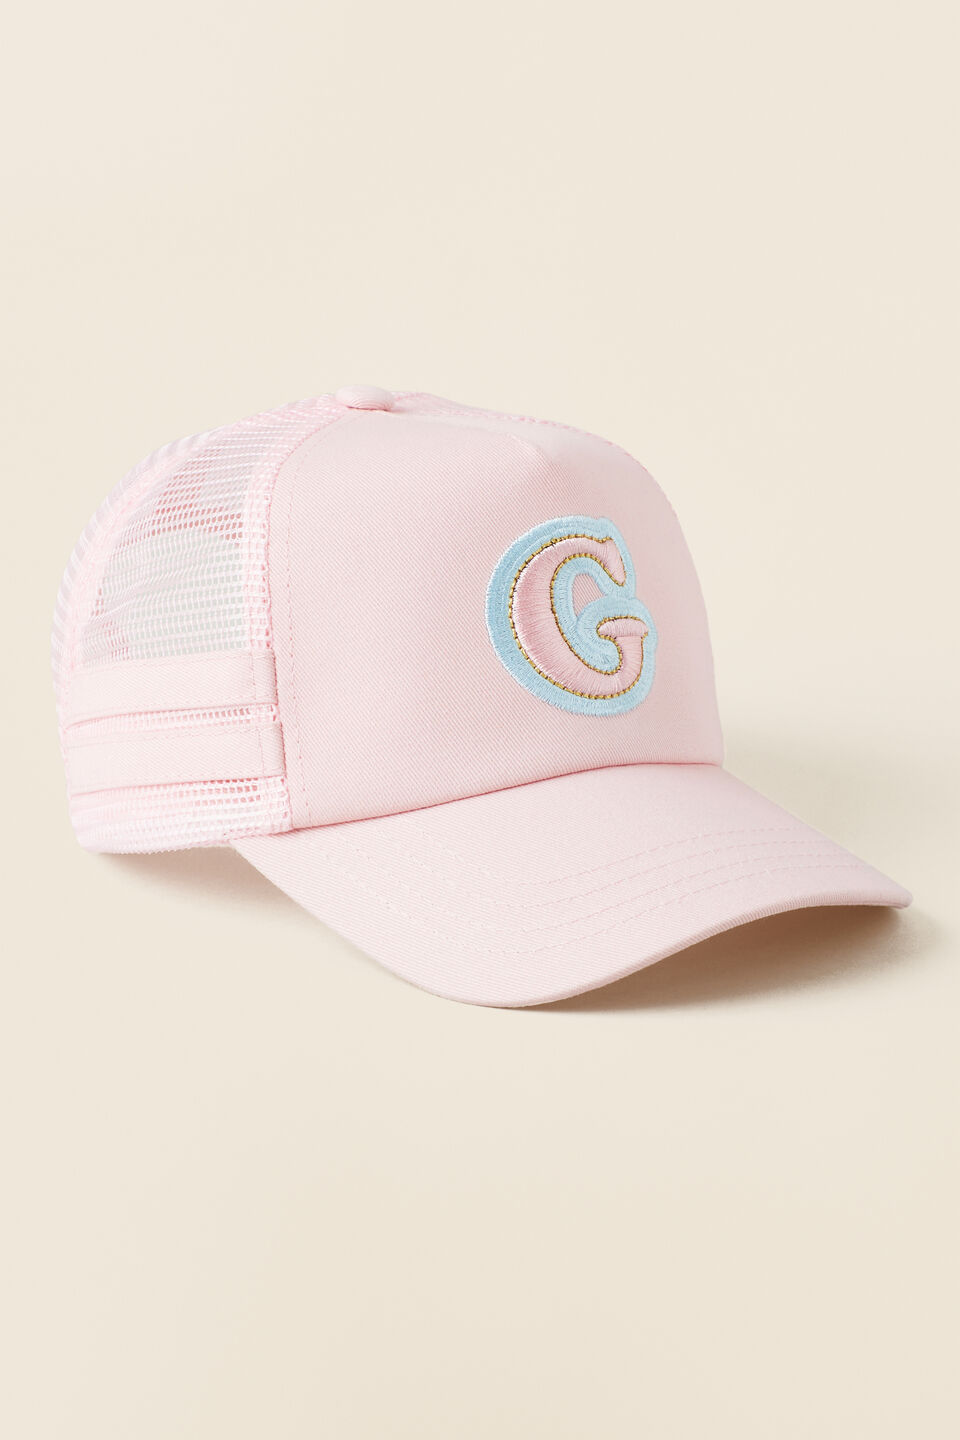 Embroidered Initial Cap  G